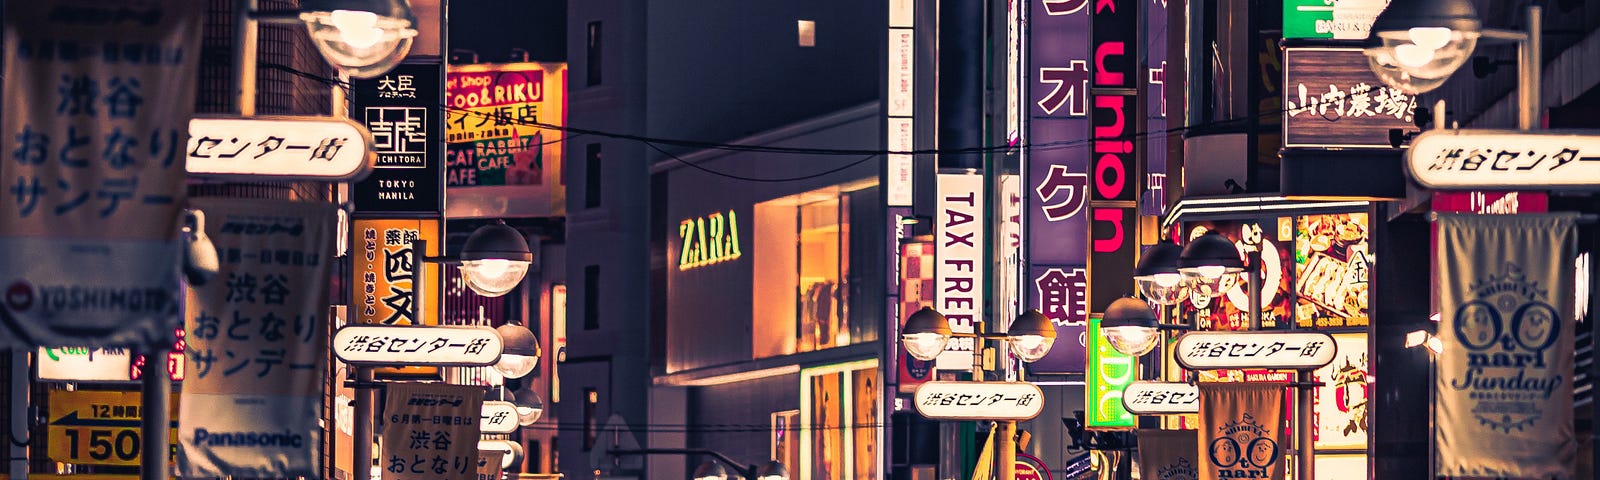 A busy street with neon signs, filled with shops and shoppers.